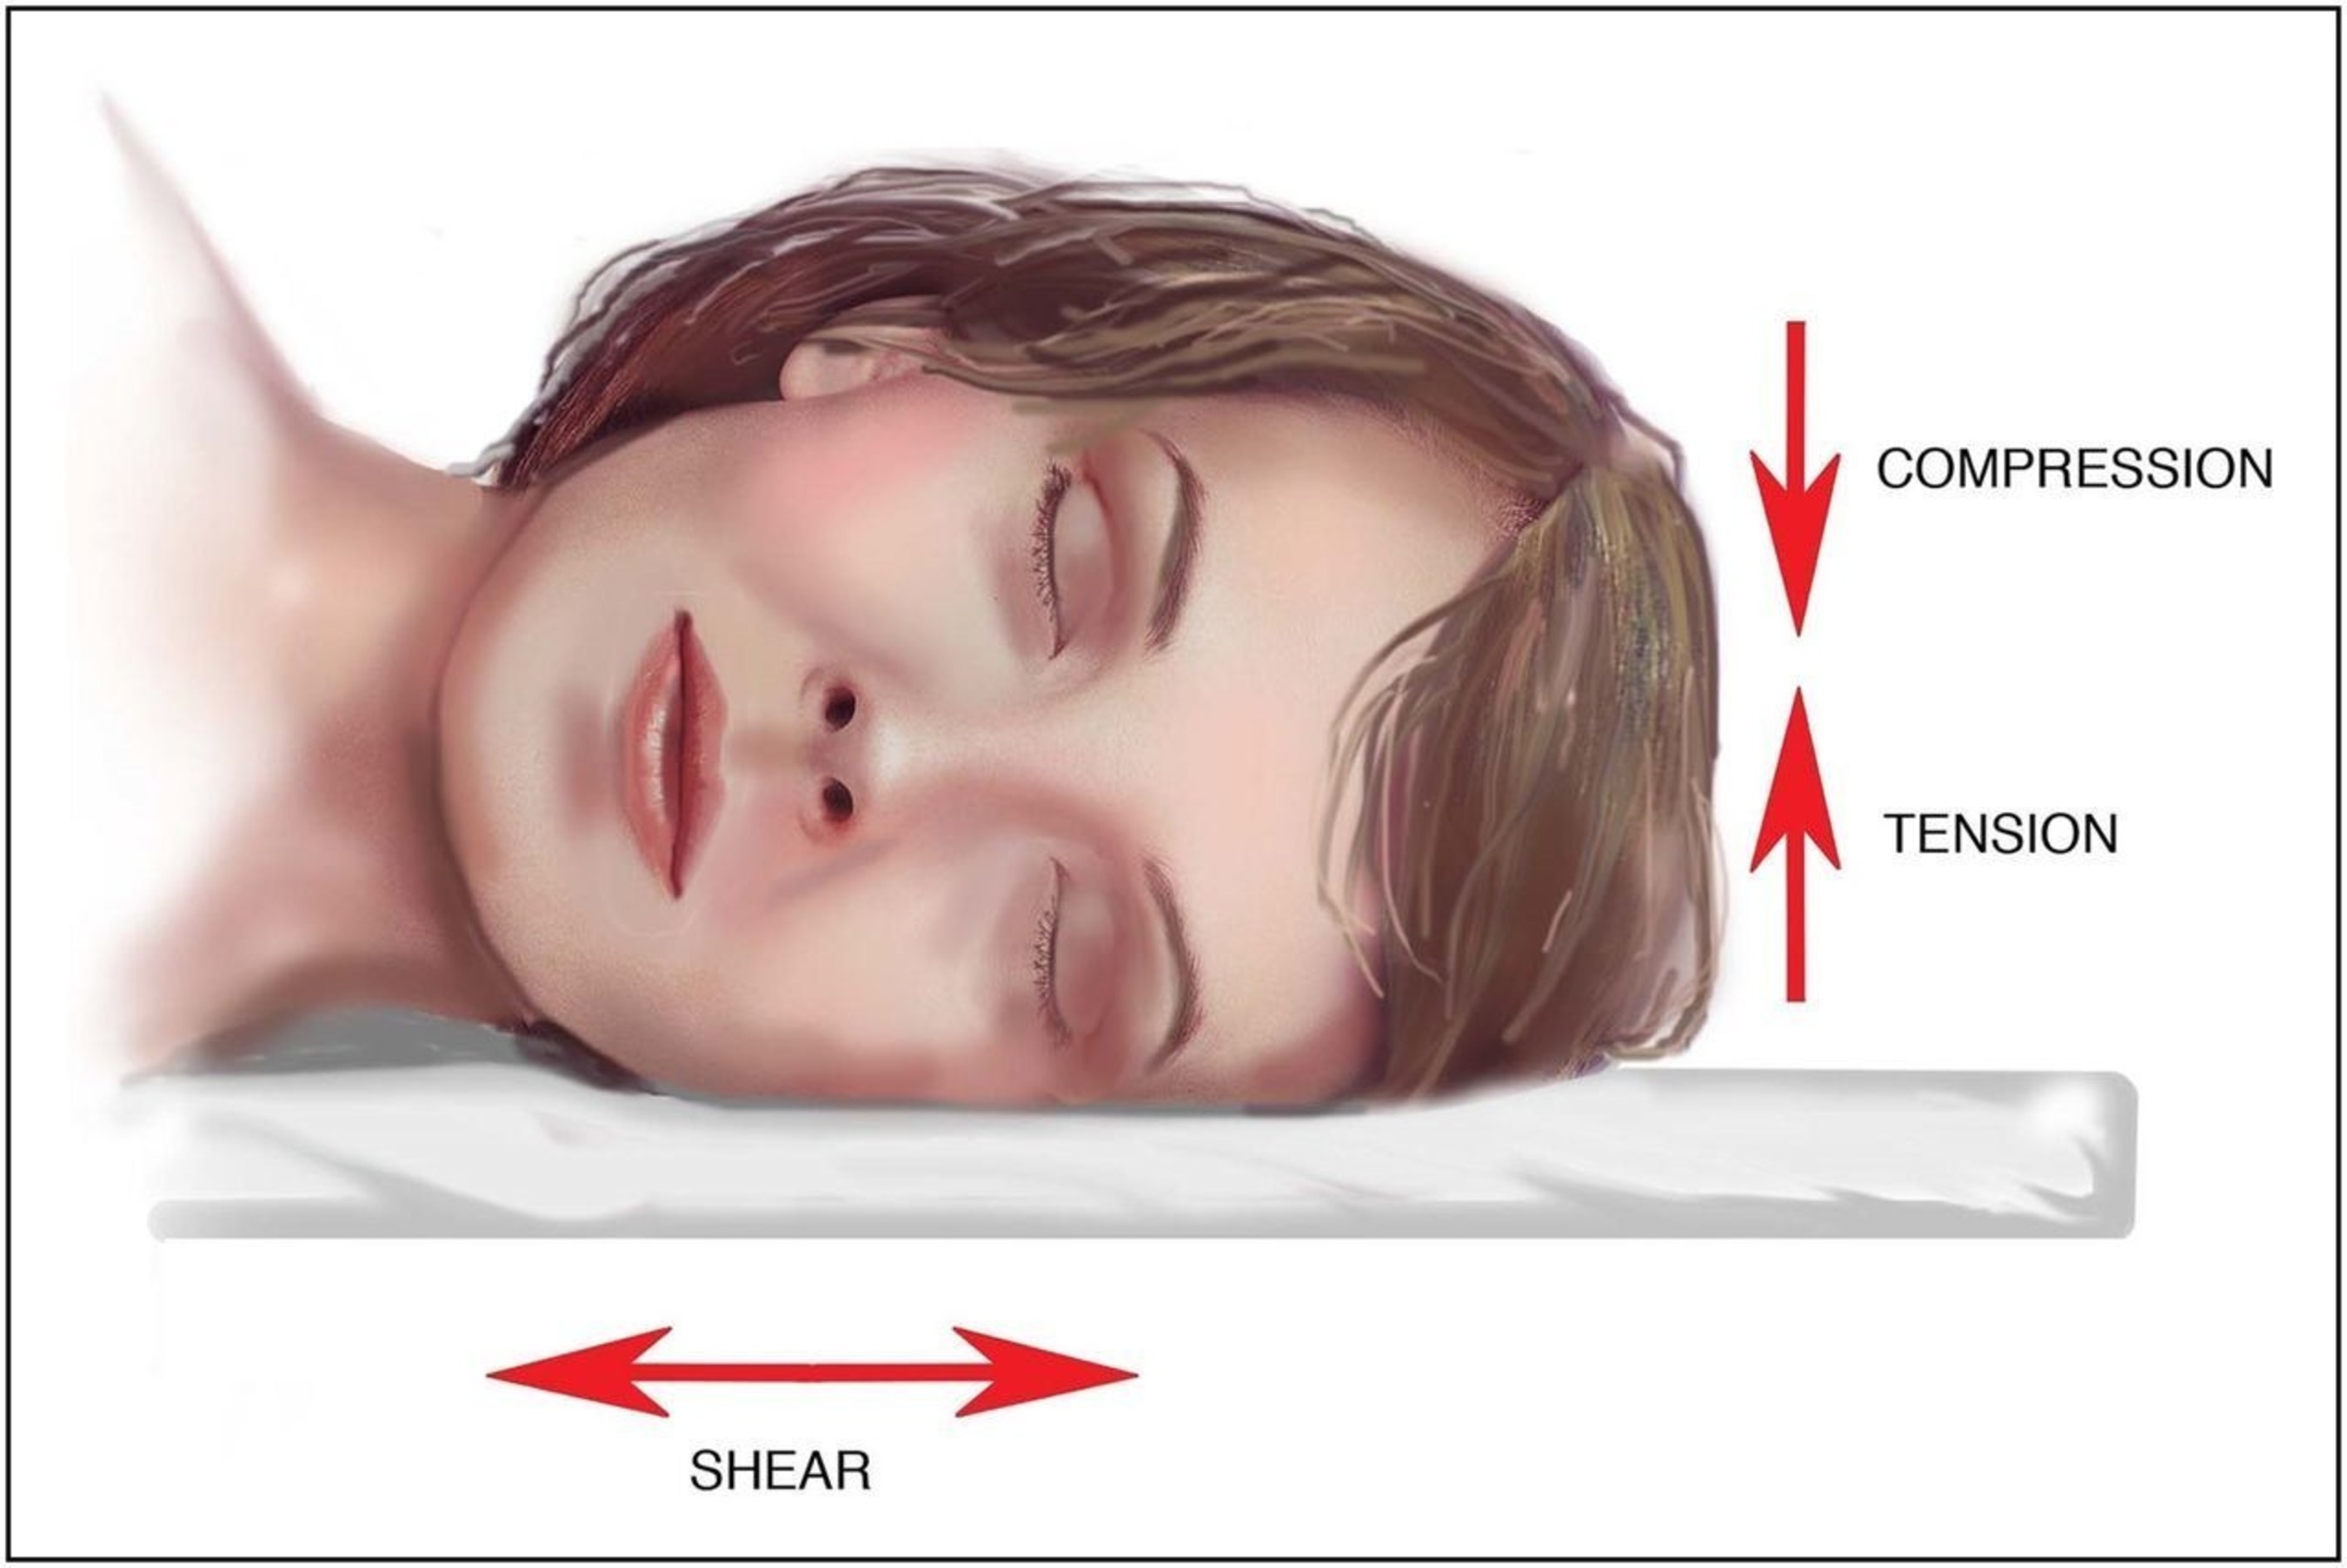 External forces (including compression, tension, and shear) act on facial tissue in stomach or side sleep positions.